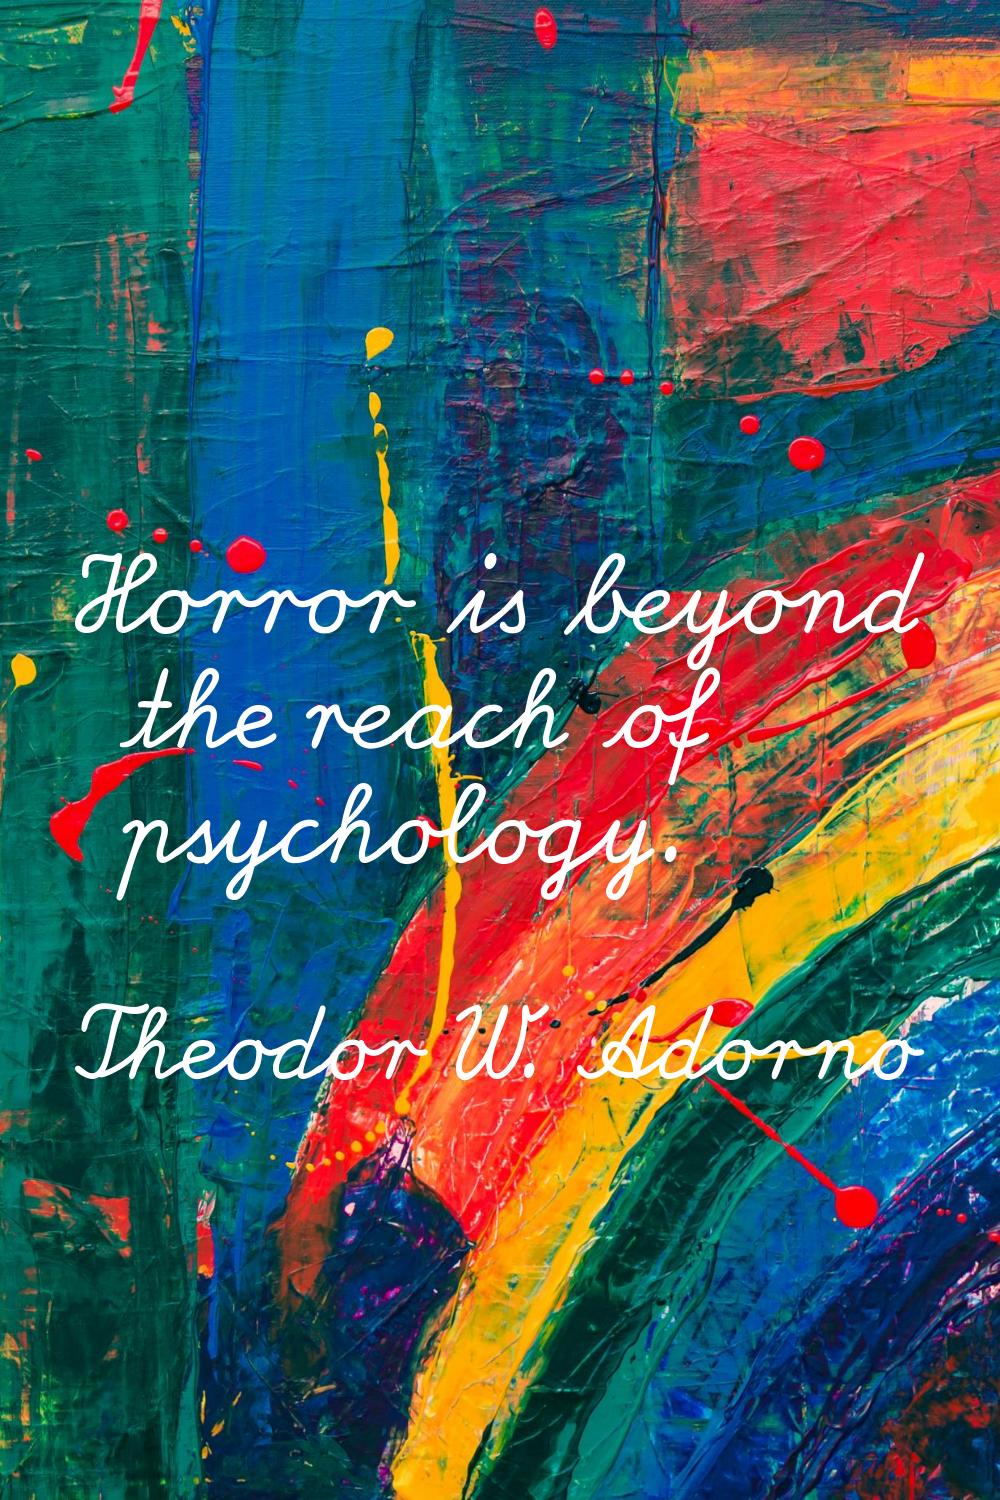 Horror is beyond the reach of psychology.